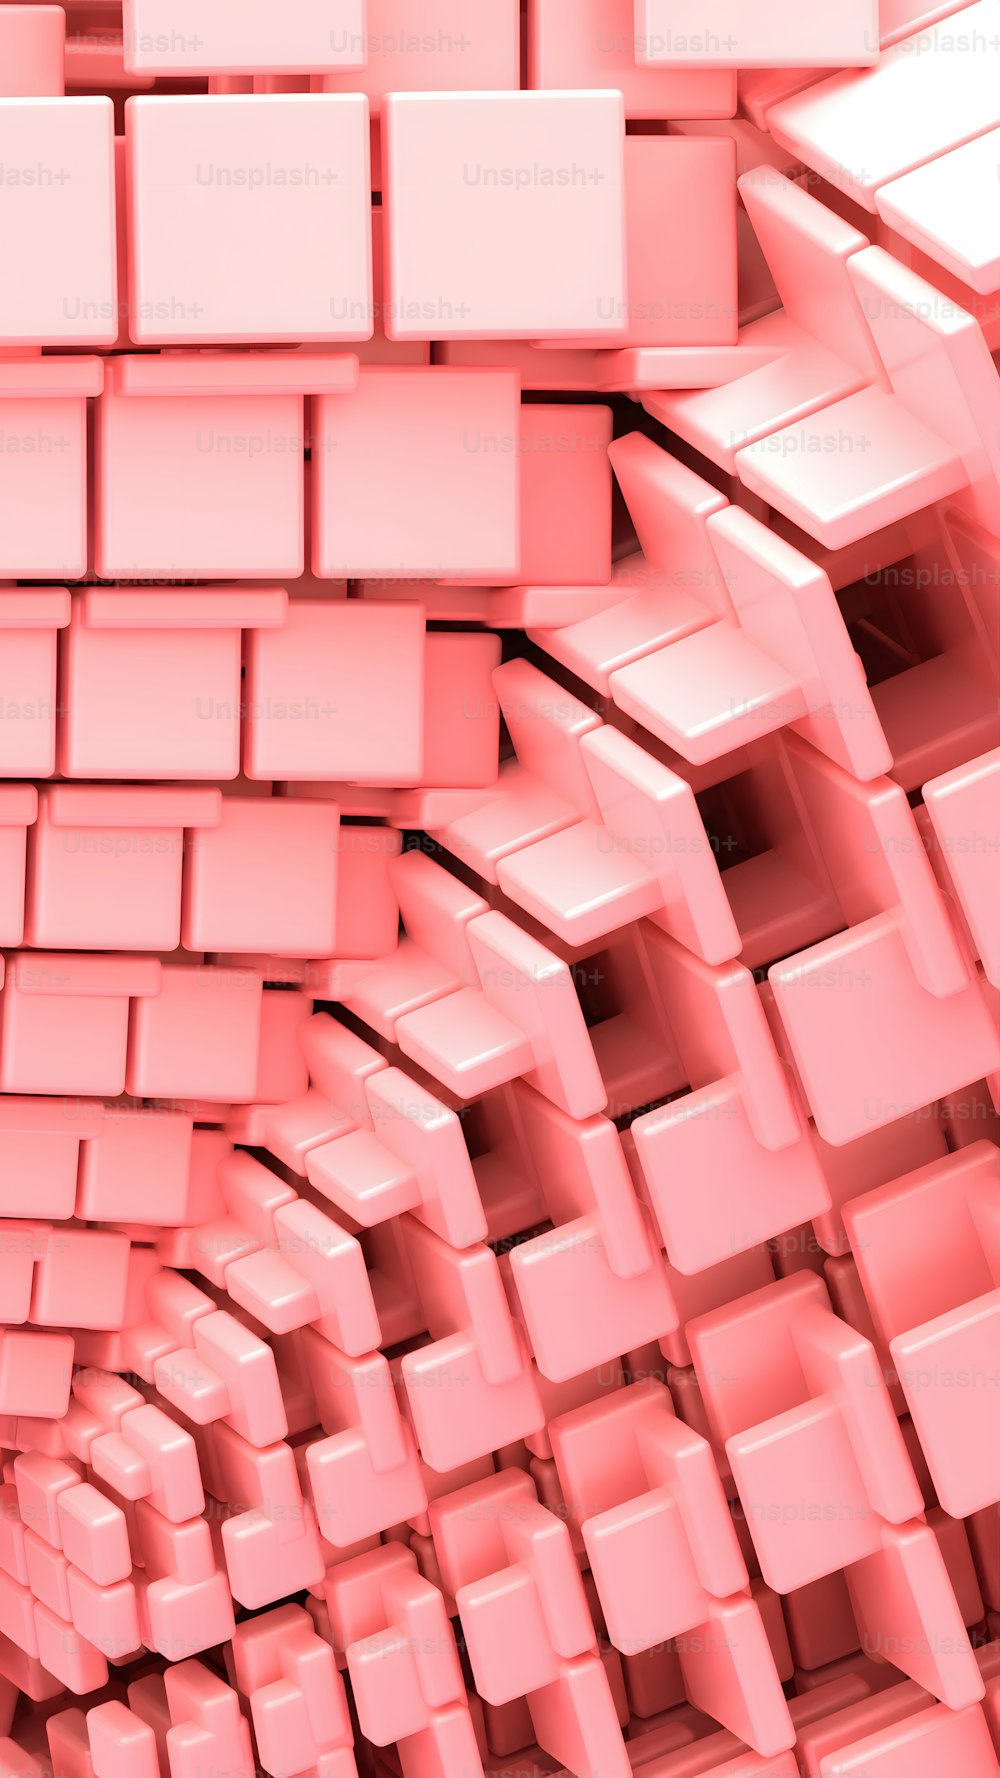 a large group of cubes that are pink and white